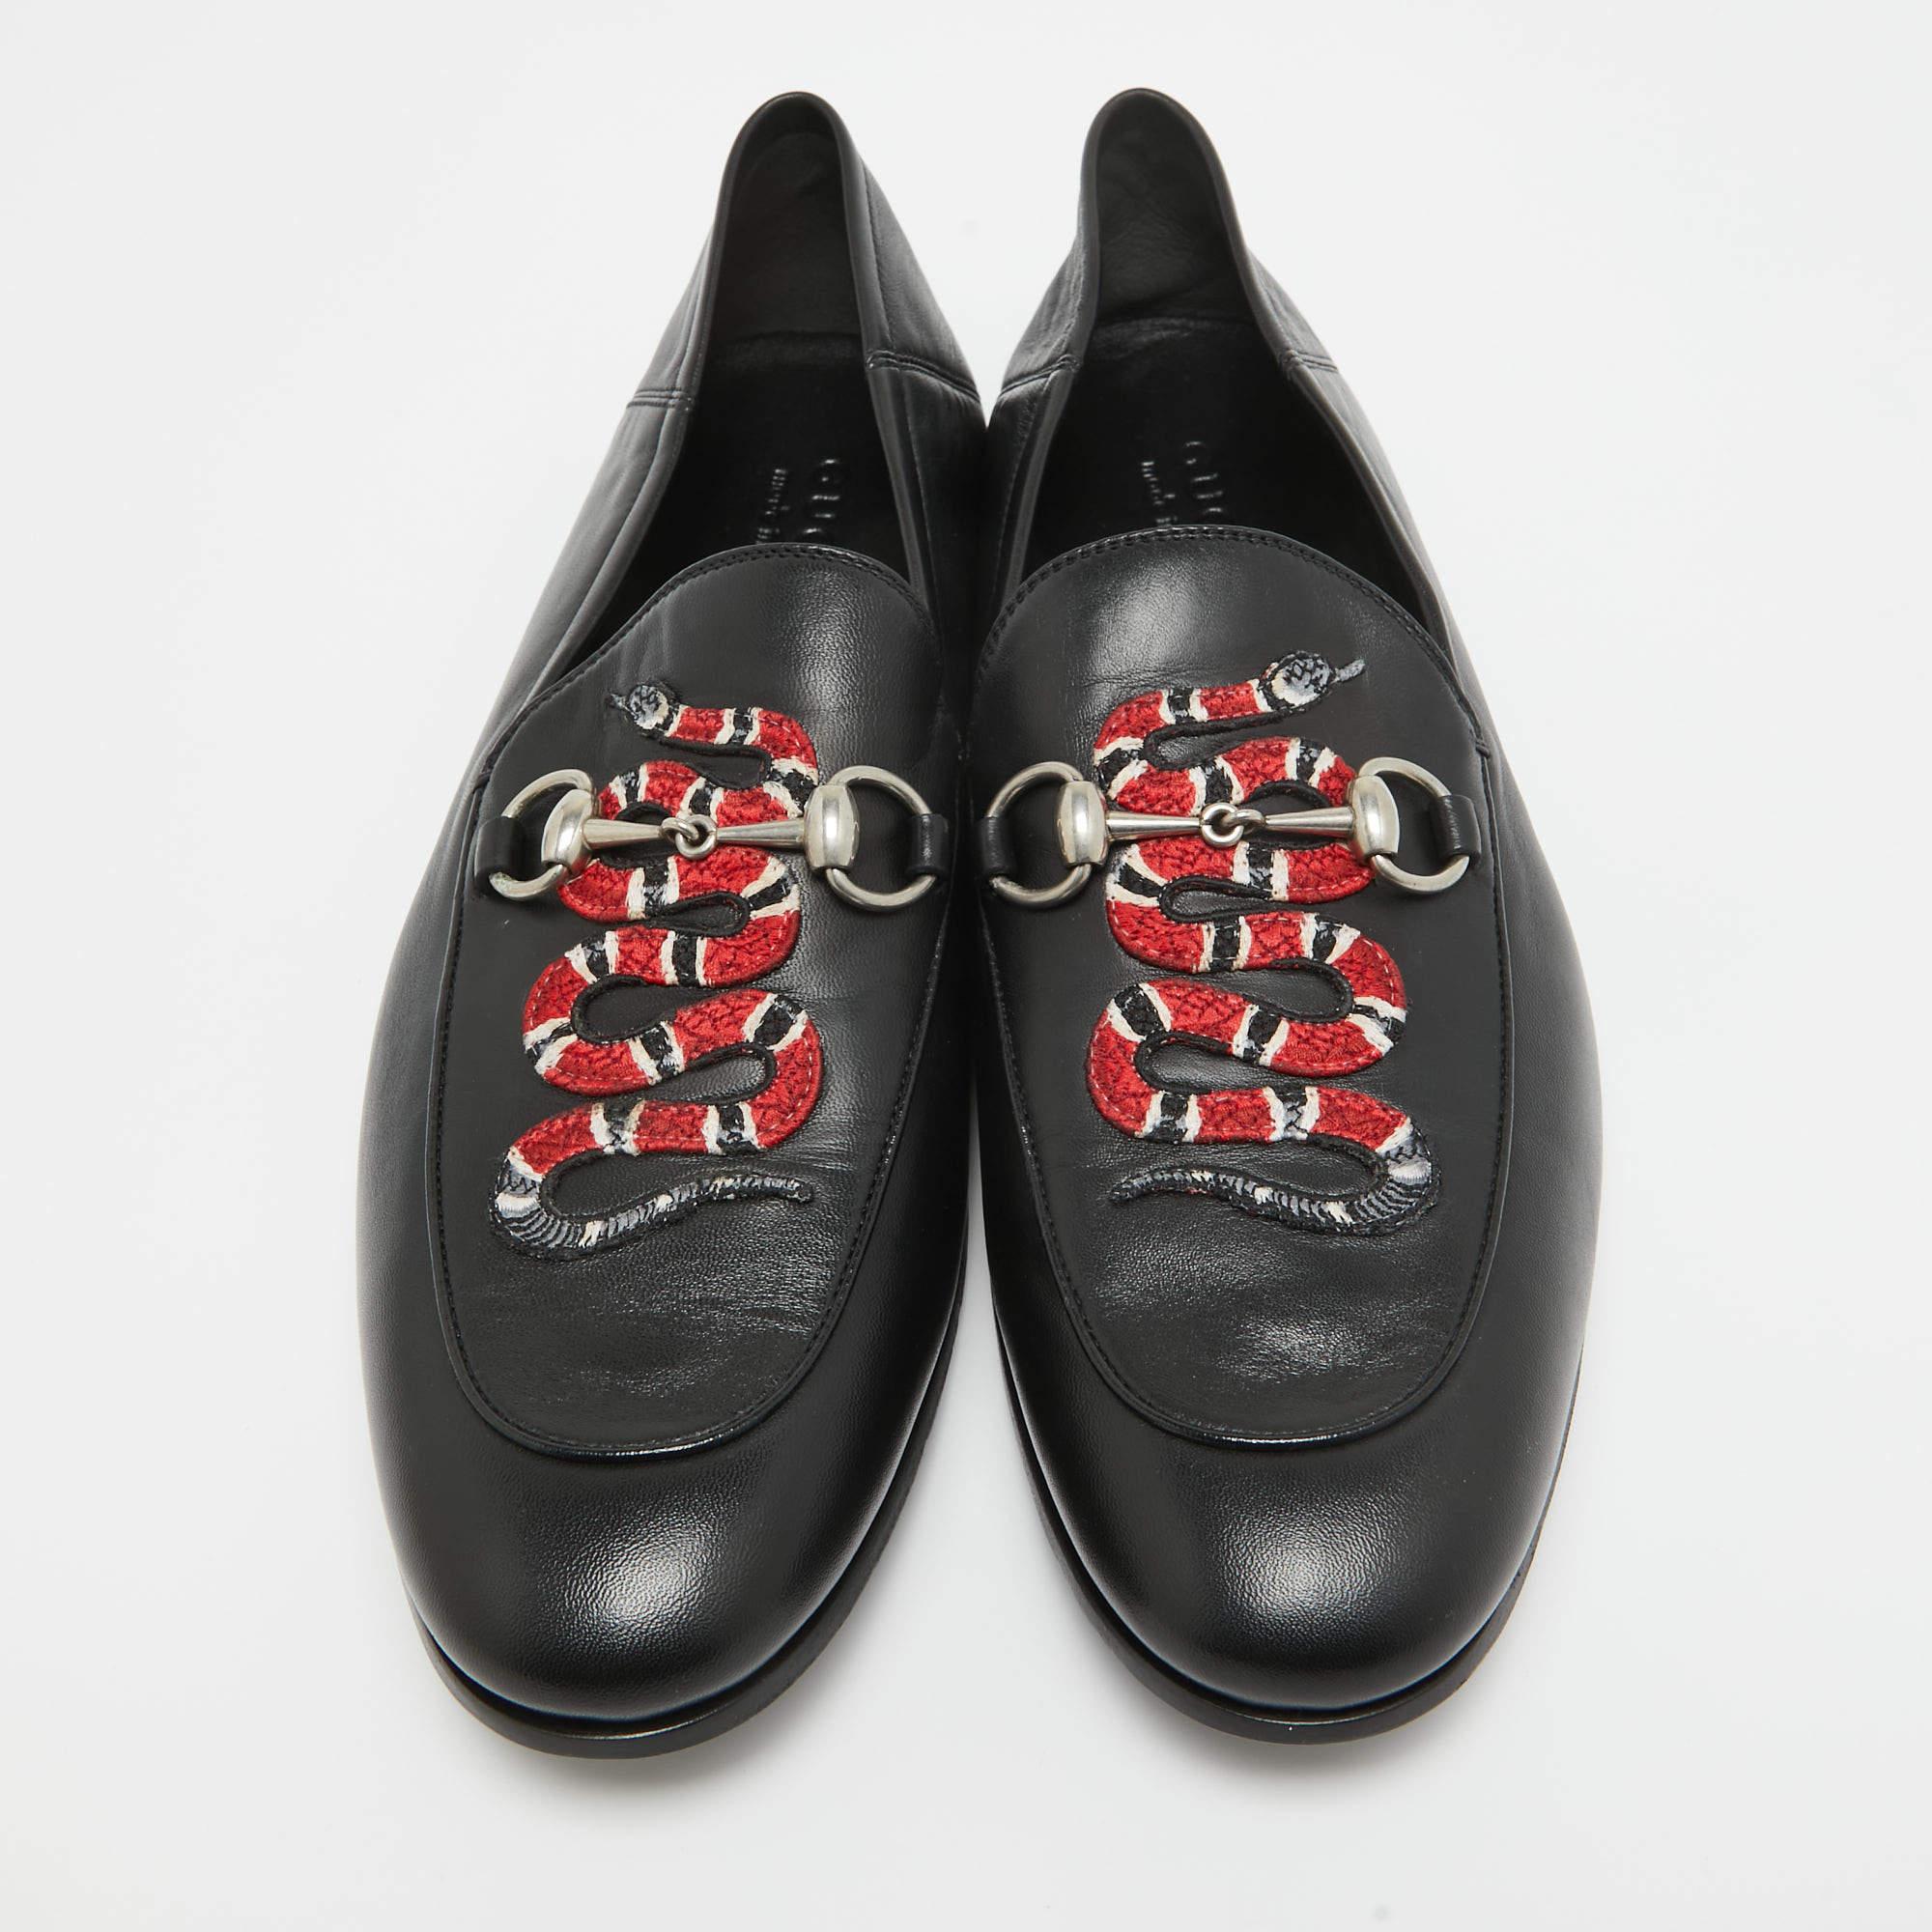 Gucci Black Leather Embroidered Kingsnake Brixton Horsebit Loafers Size 44.5 1